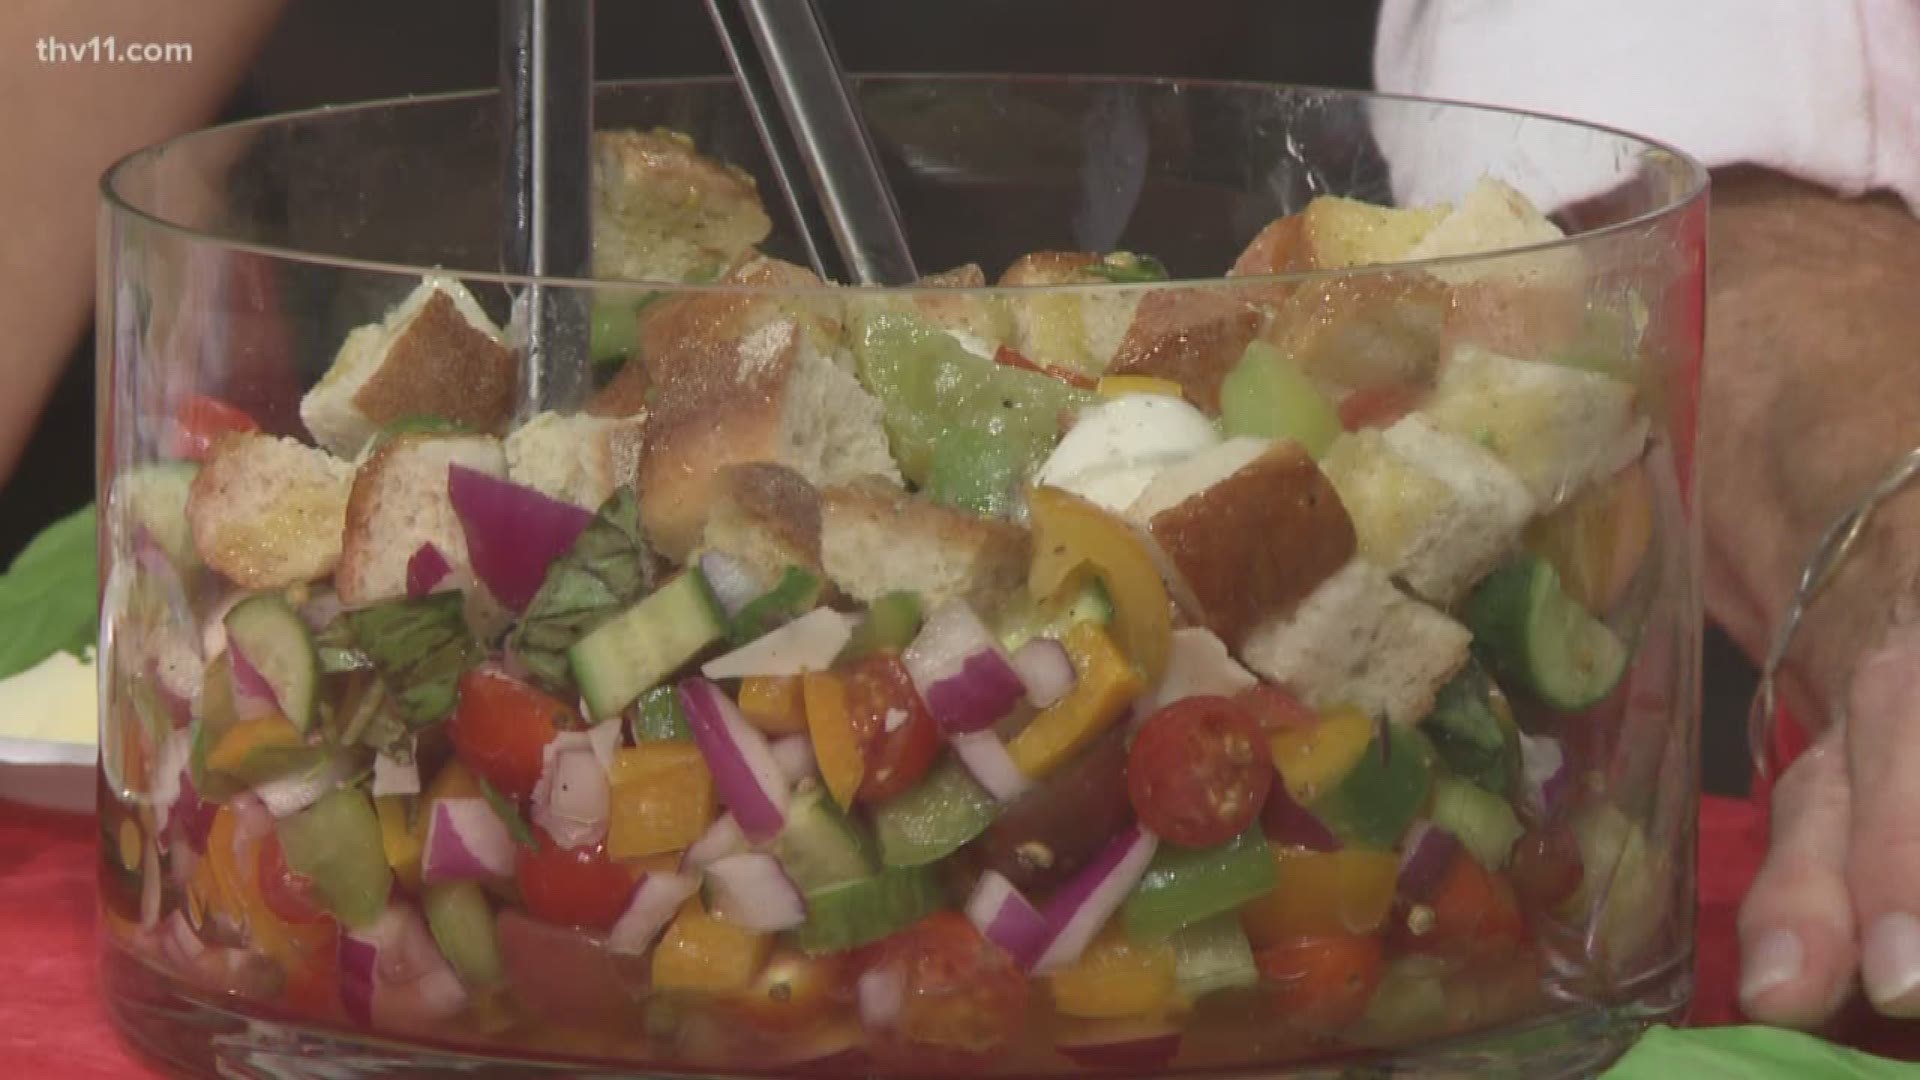 Debbie Arnold Shows us how to make a refreshing summer salad.